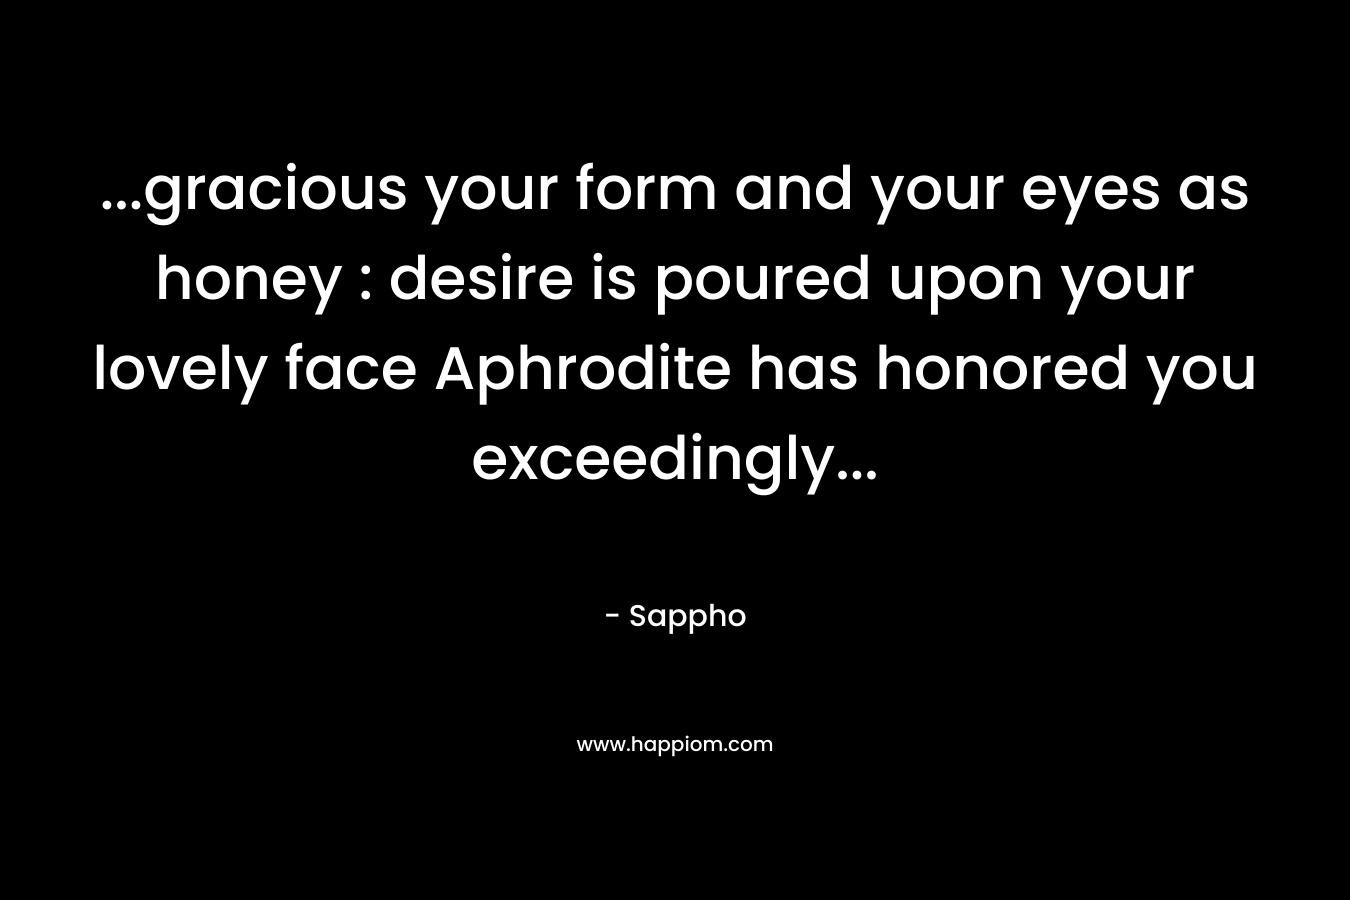 ...gracious your form and your eyes as honey : desire is poured upon your lovely face Aphrodite has honored you exceedingly...